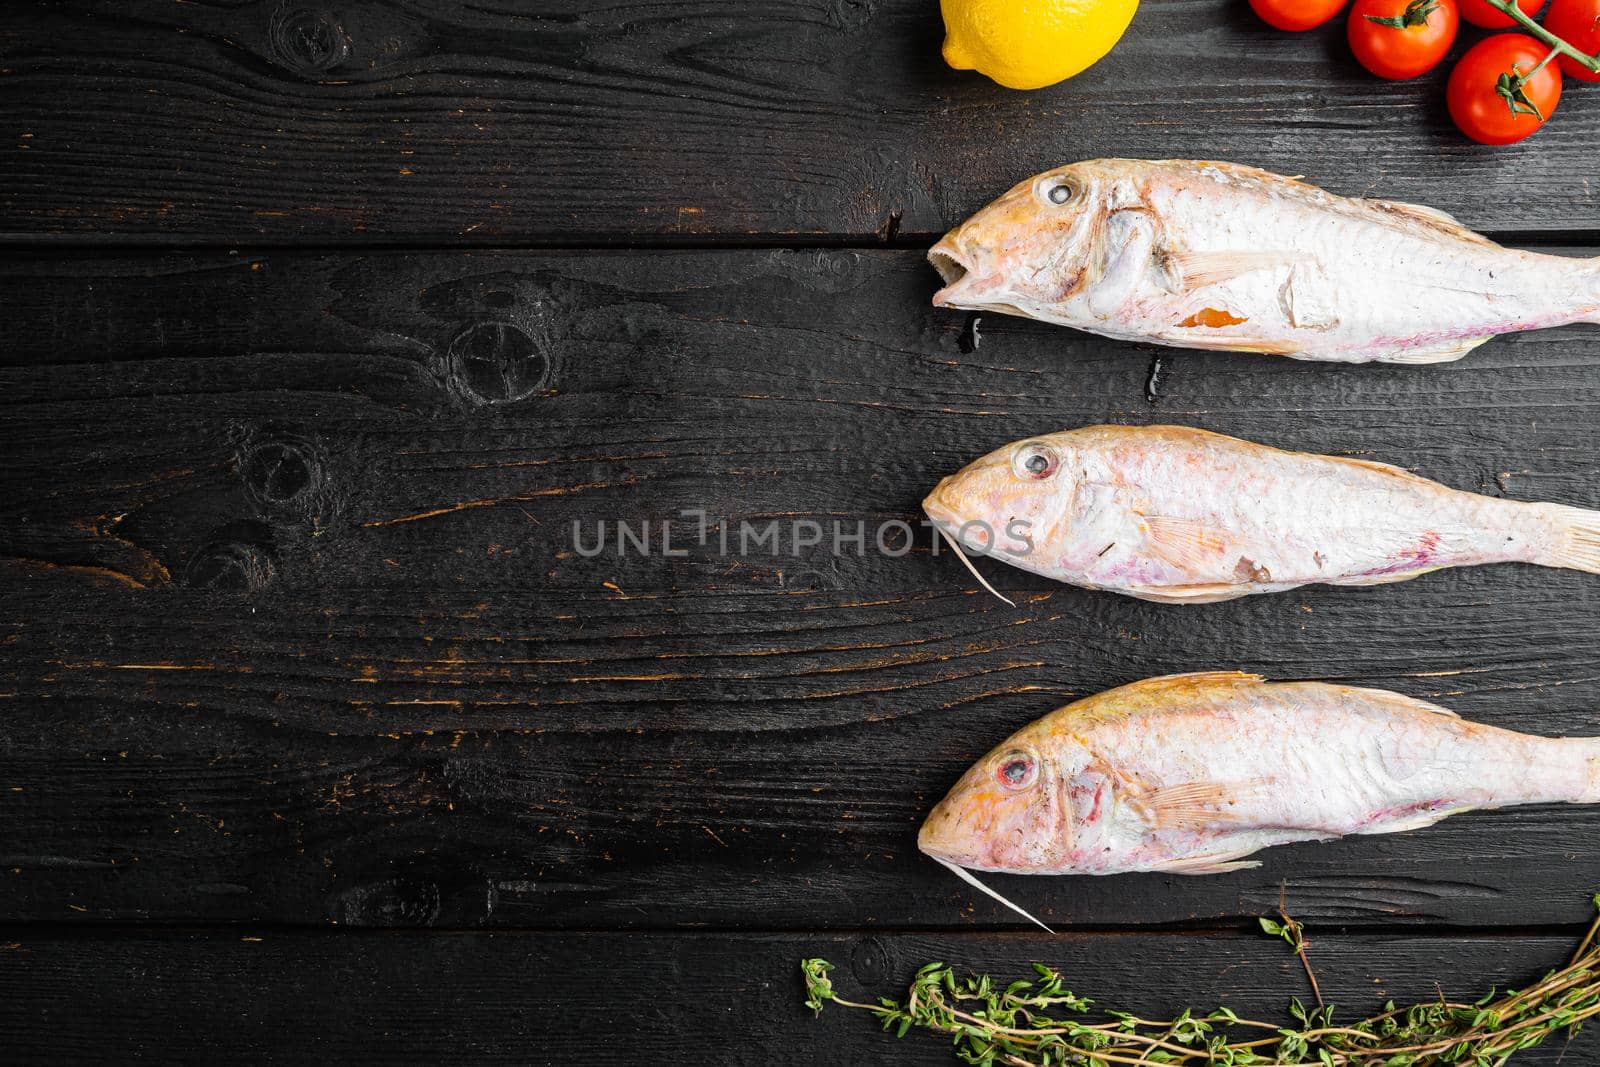 Raw Goatfish fresh whole fish, with ingredients and herbs, on black wooden table background, top view flat lay, with copy space for text by Ilianesolenyi